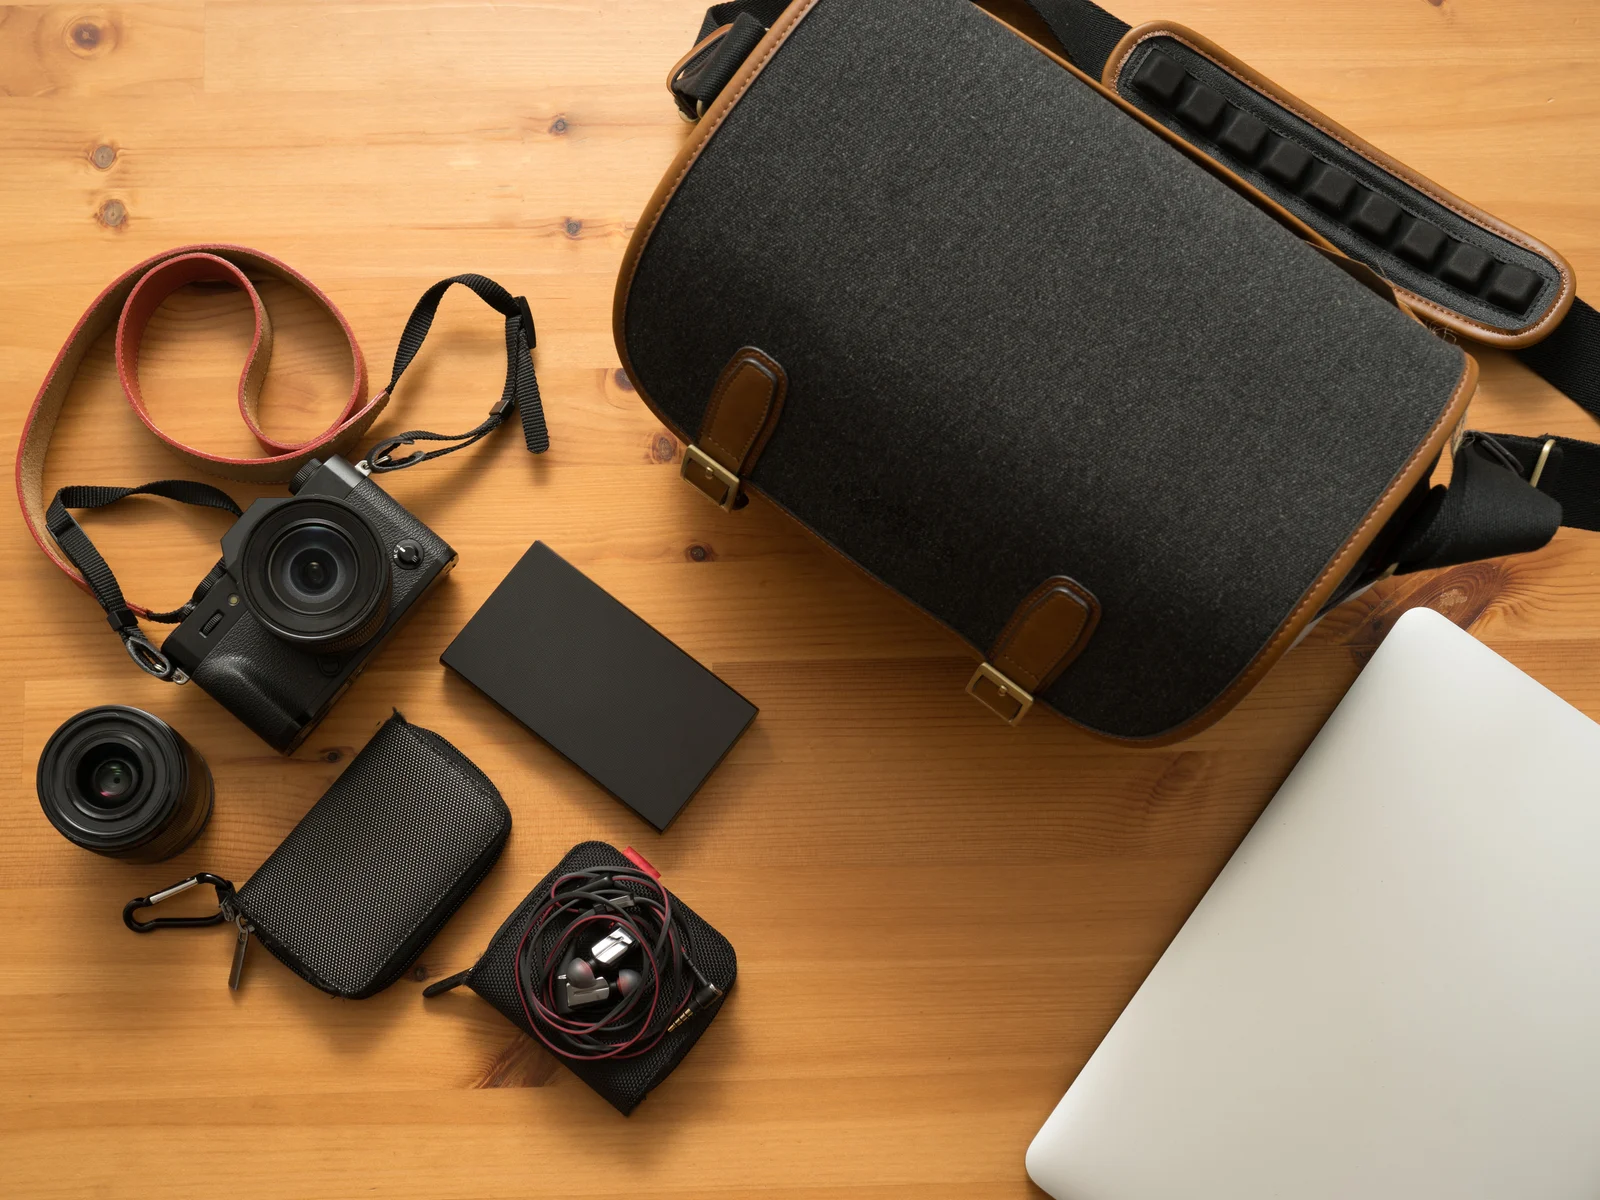 Black digital camera with an orange strap next to one of the best camera bags on a wooden table